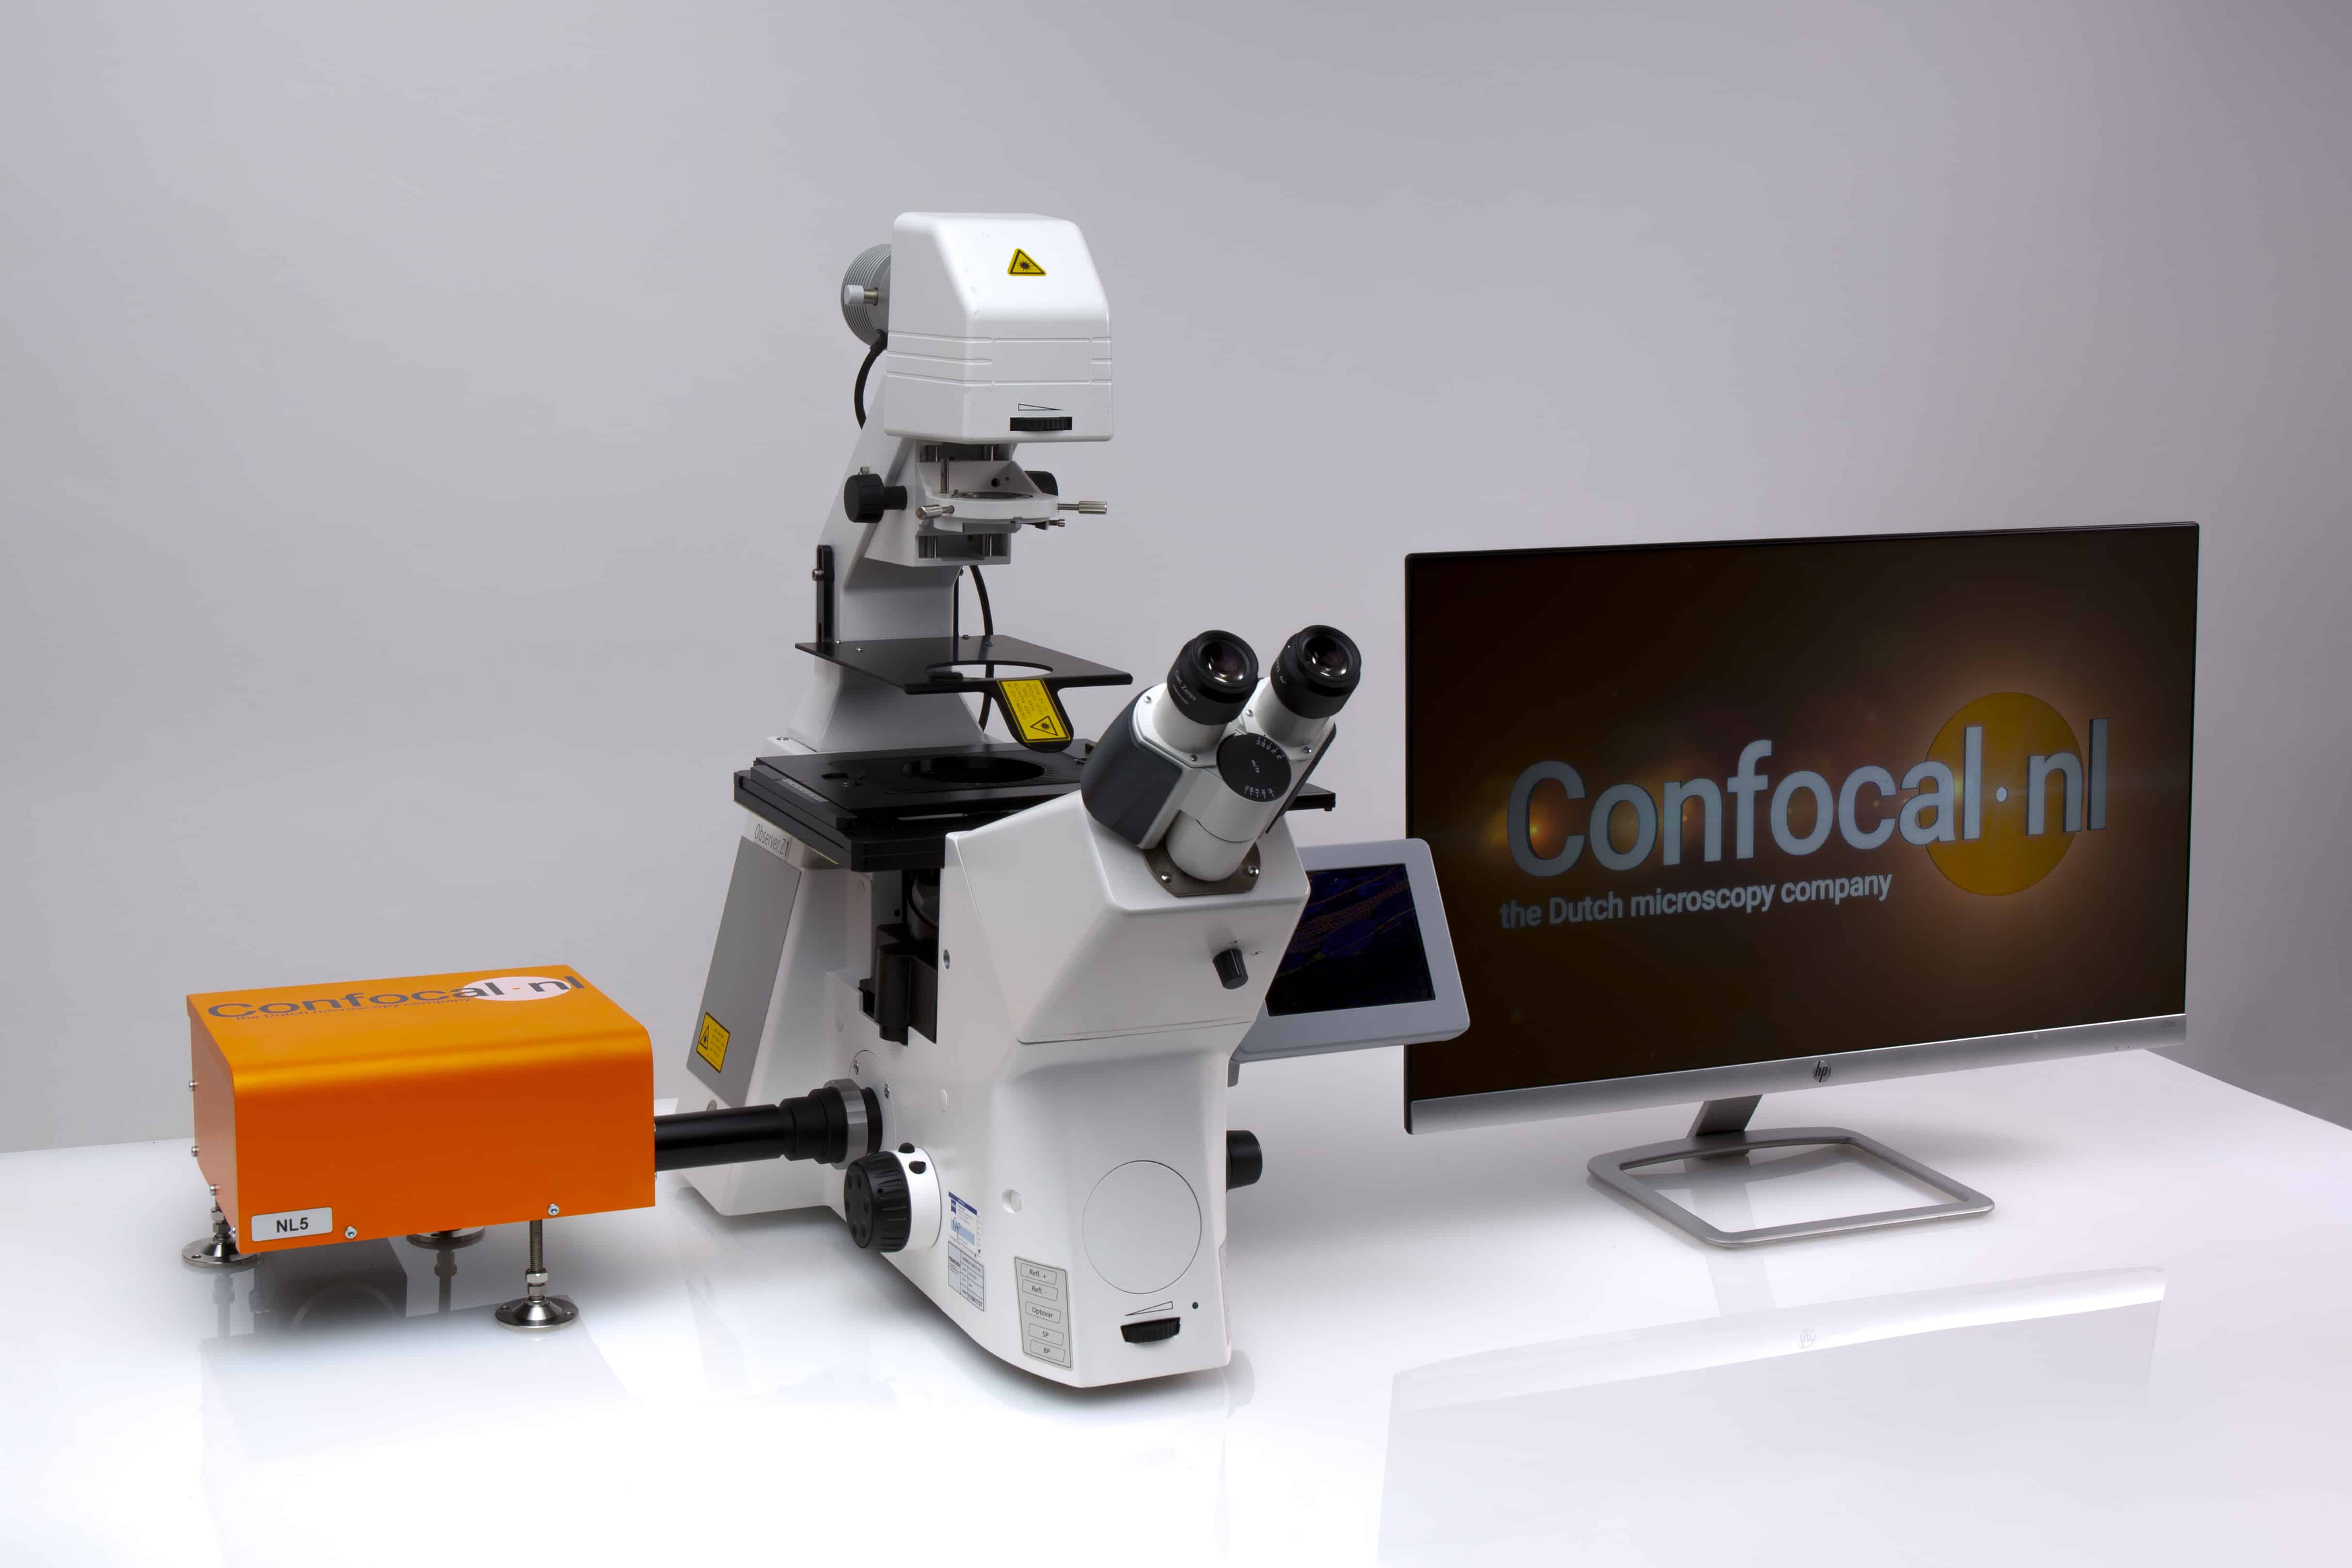 Confocal microscope system